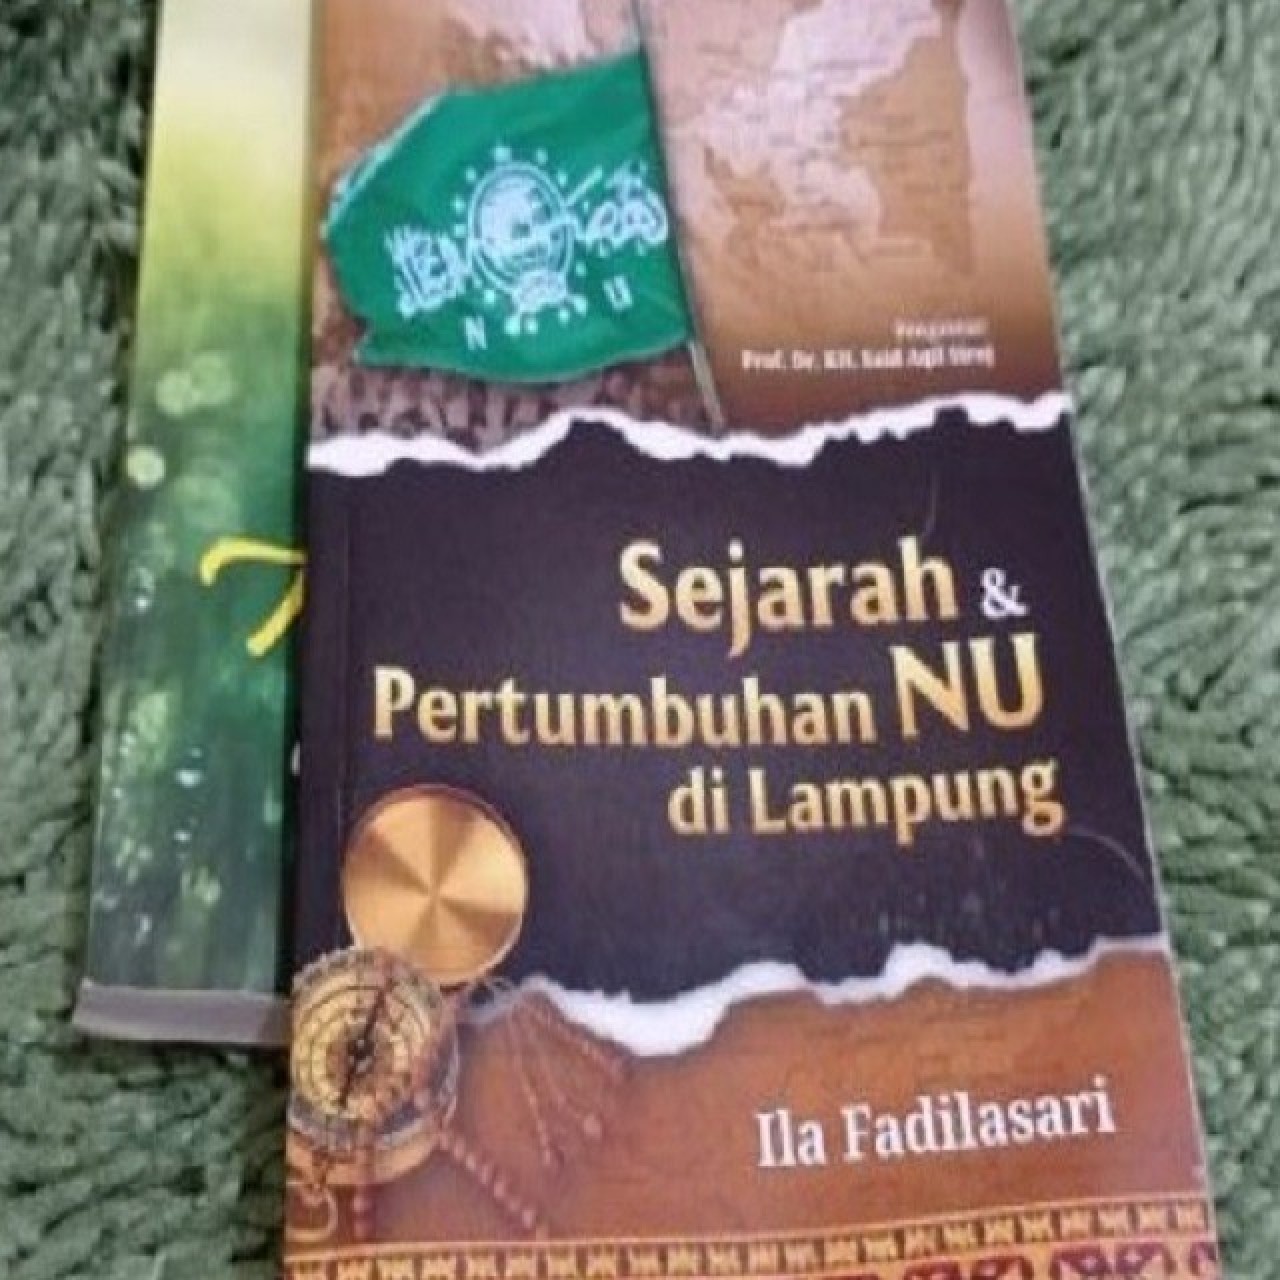 Uncovering the history and growth of NU in Lampung